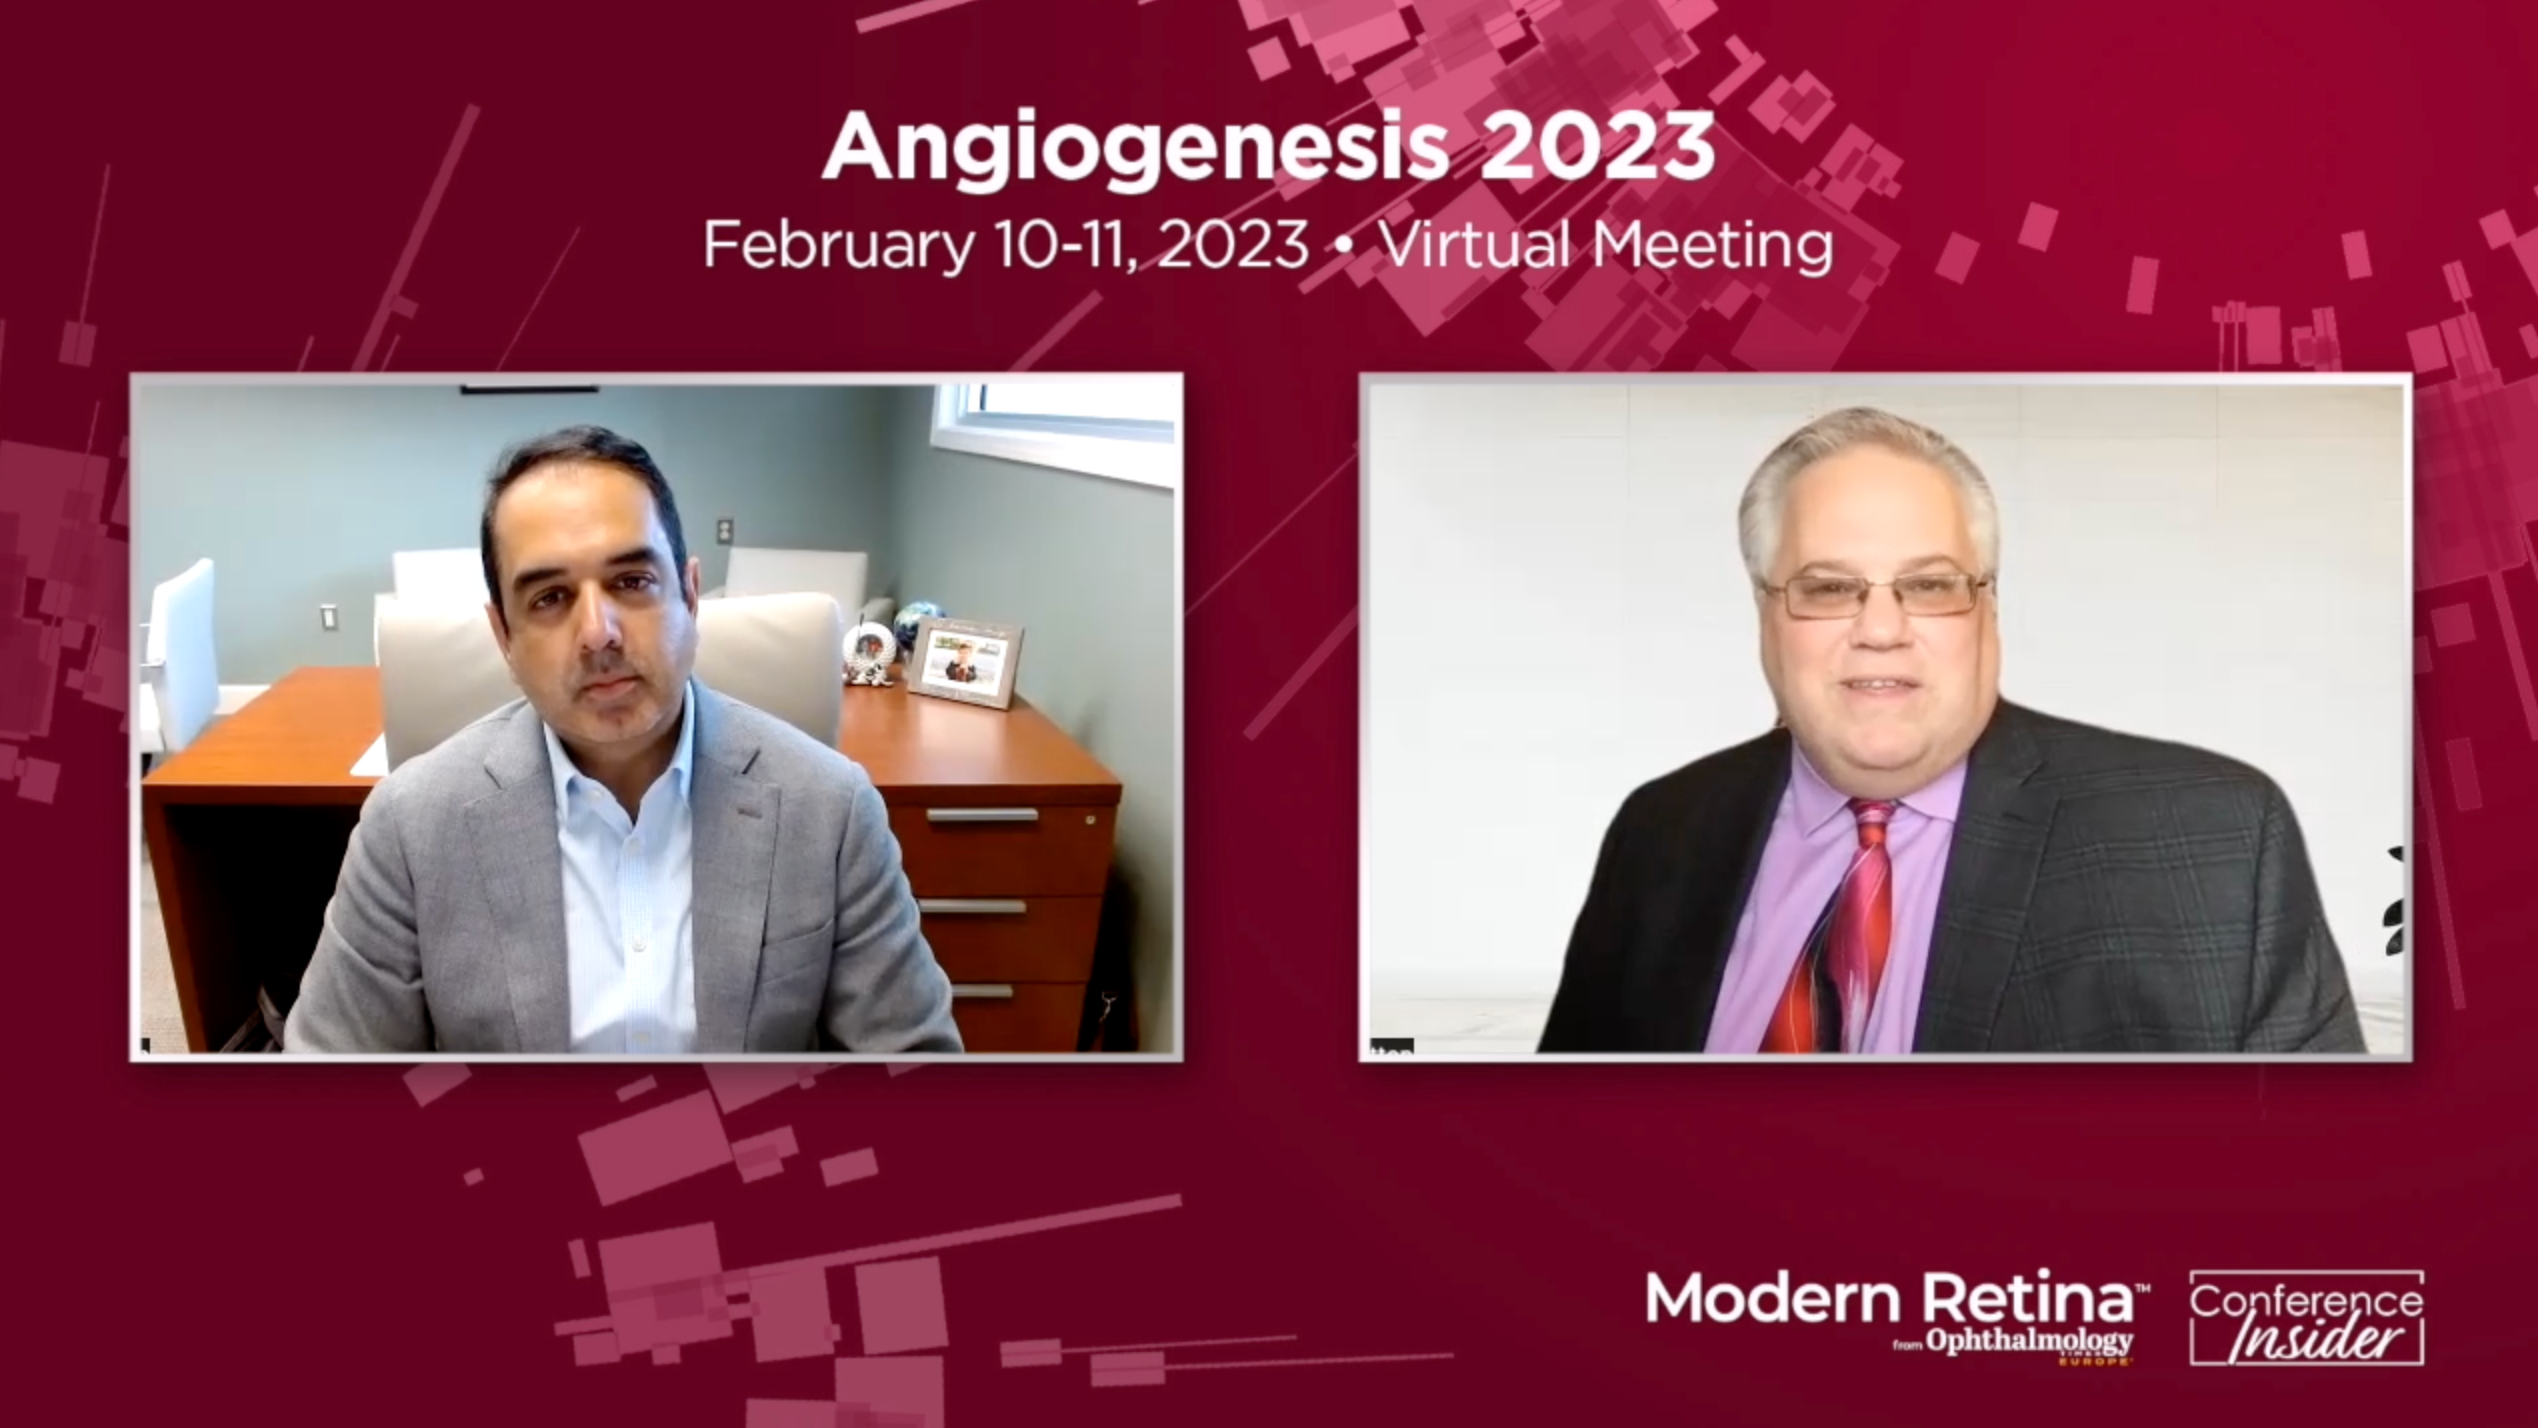 Angiogenesis 2023: DERBY, OAKS clinical trials for geographic atrophy demonstrate safety, efficacy